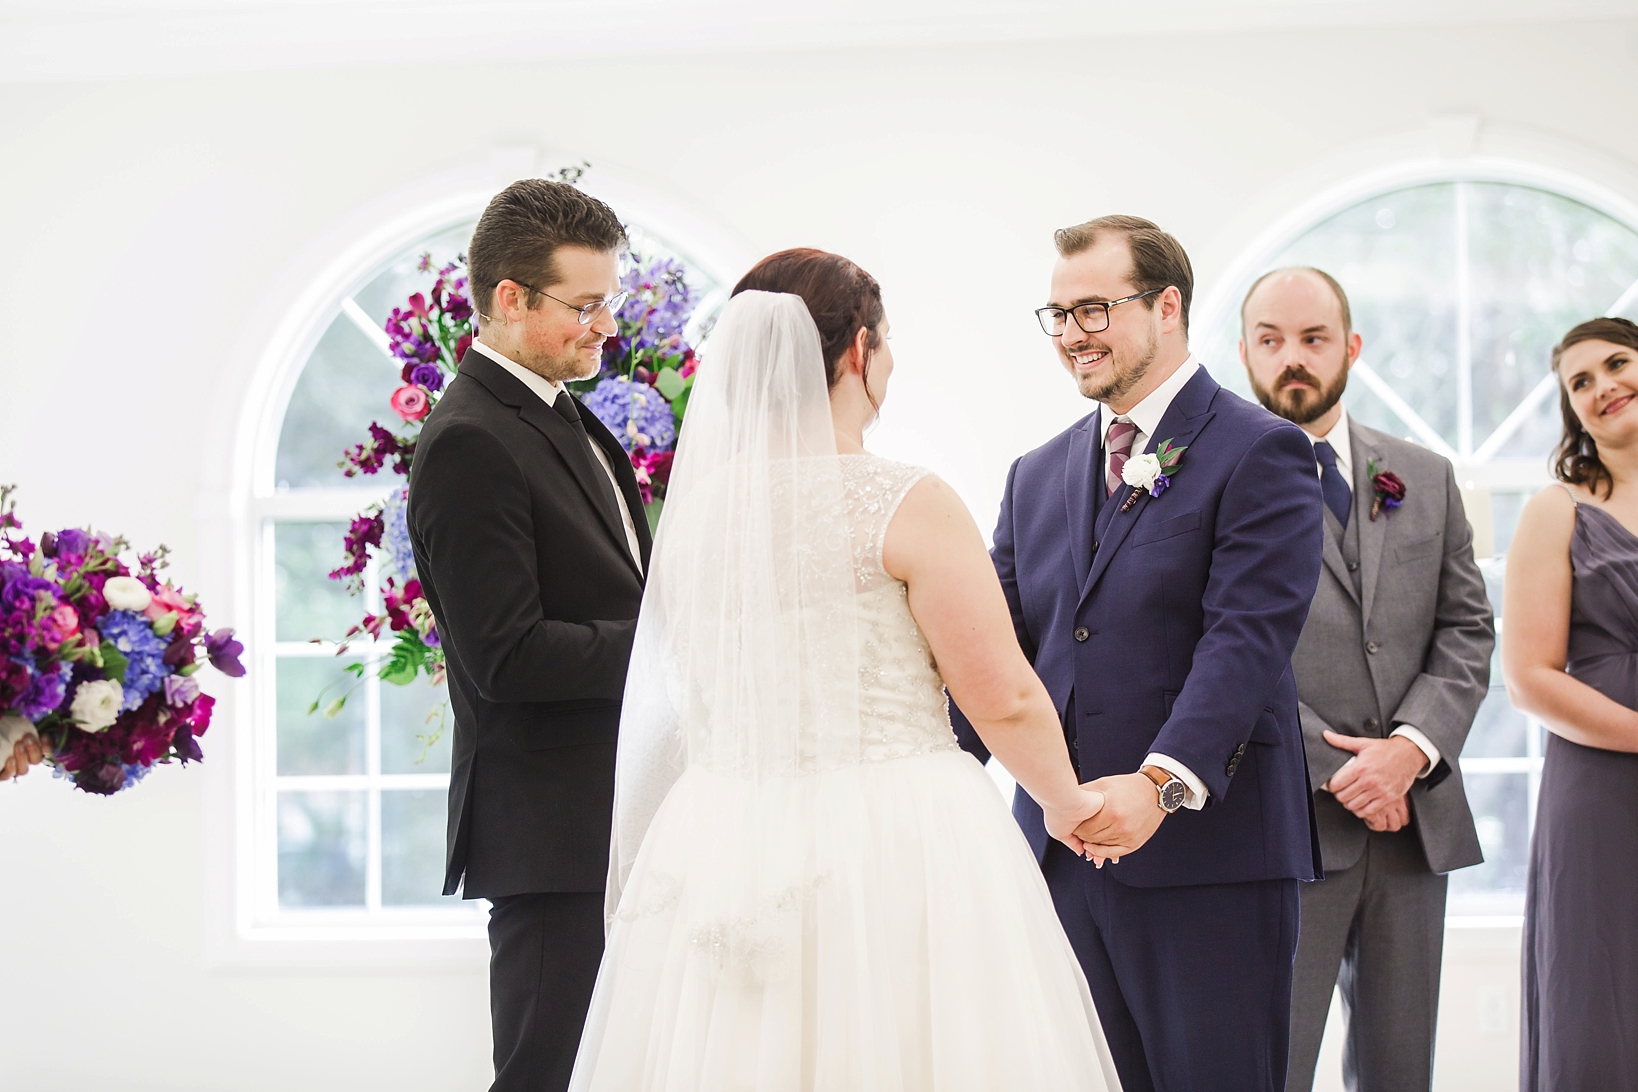 The bride and groom holding hands during the ceremony by Sarah & Ben Photography